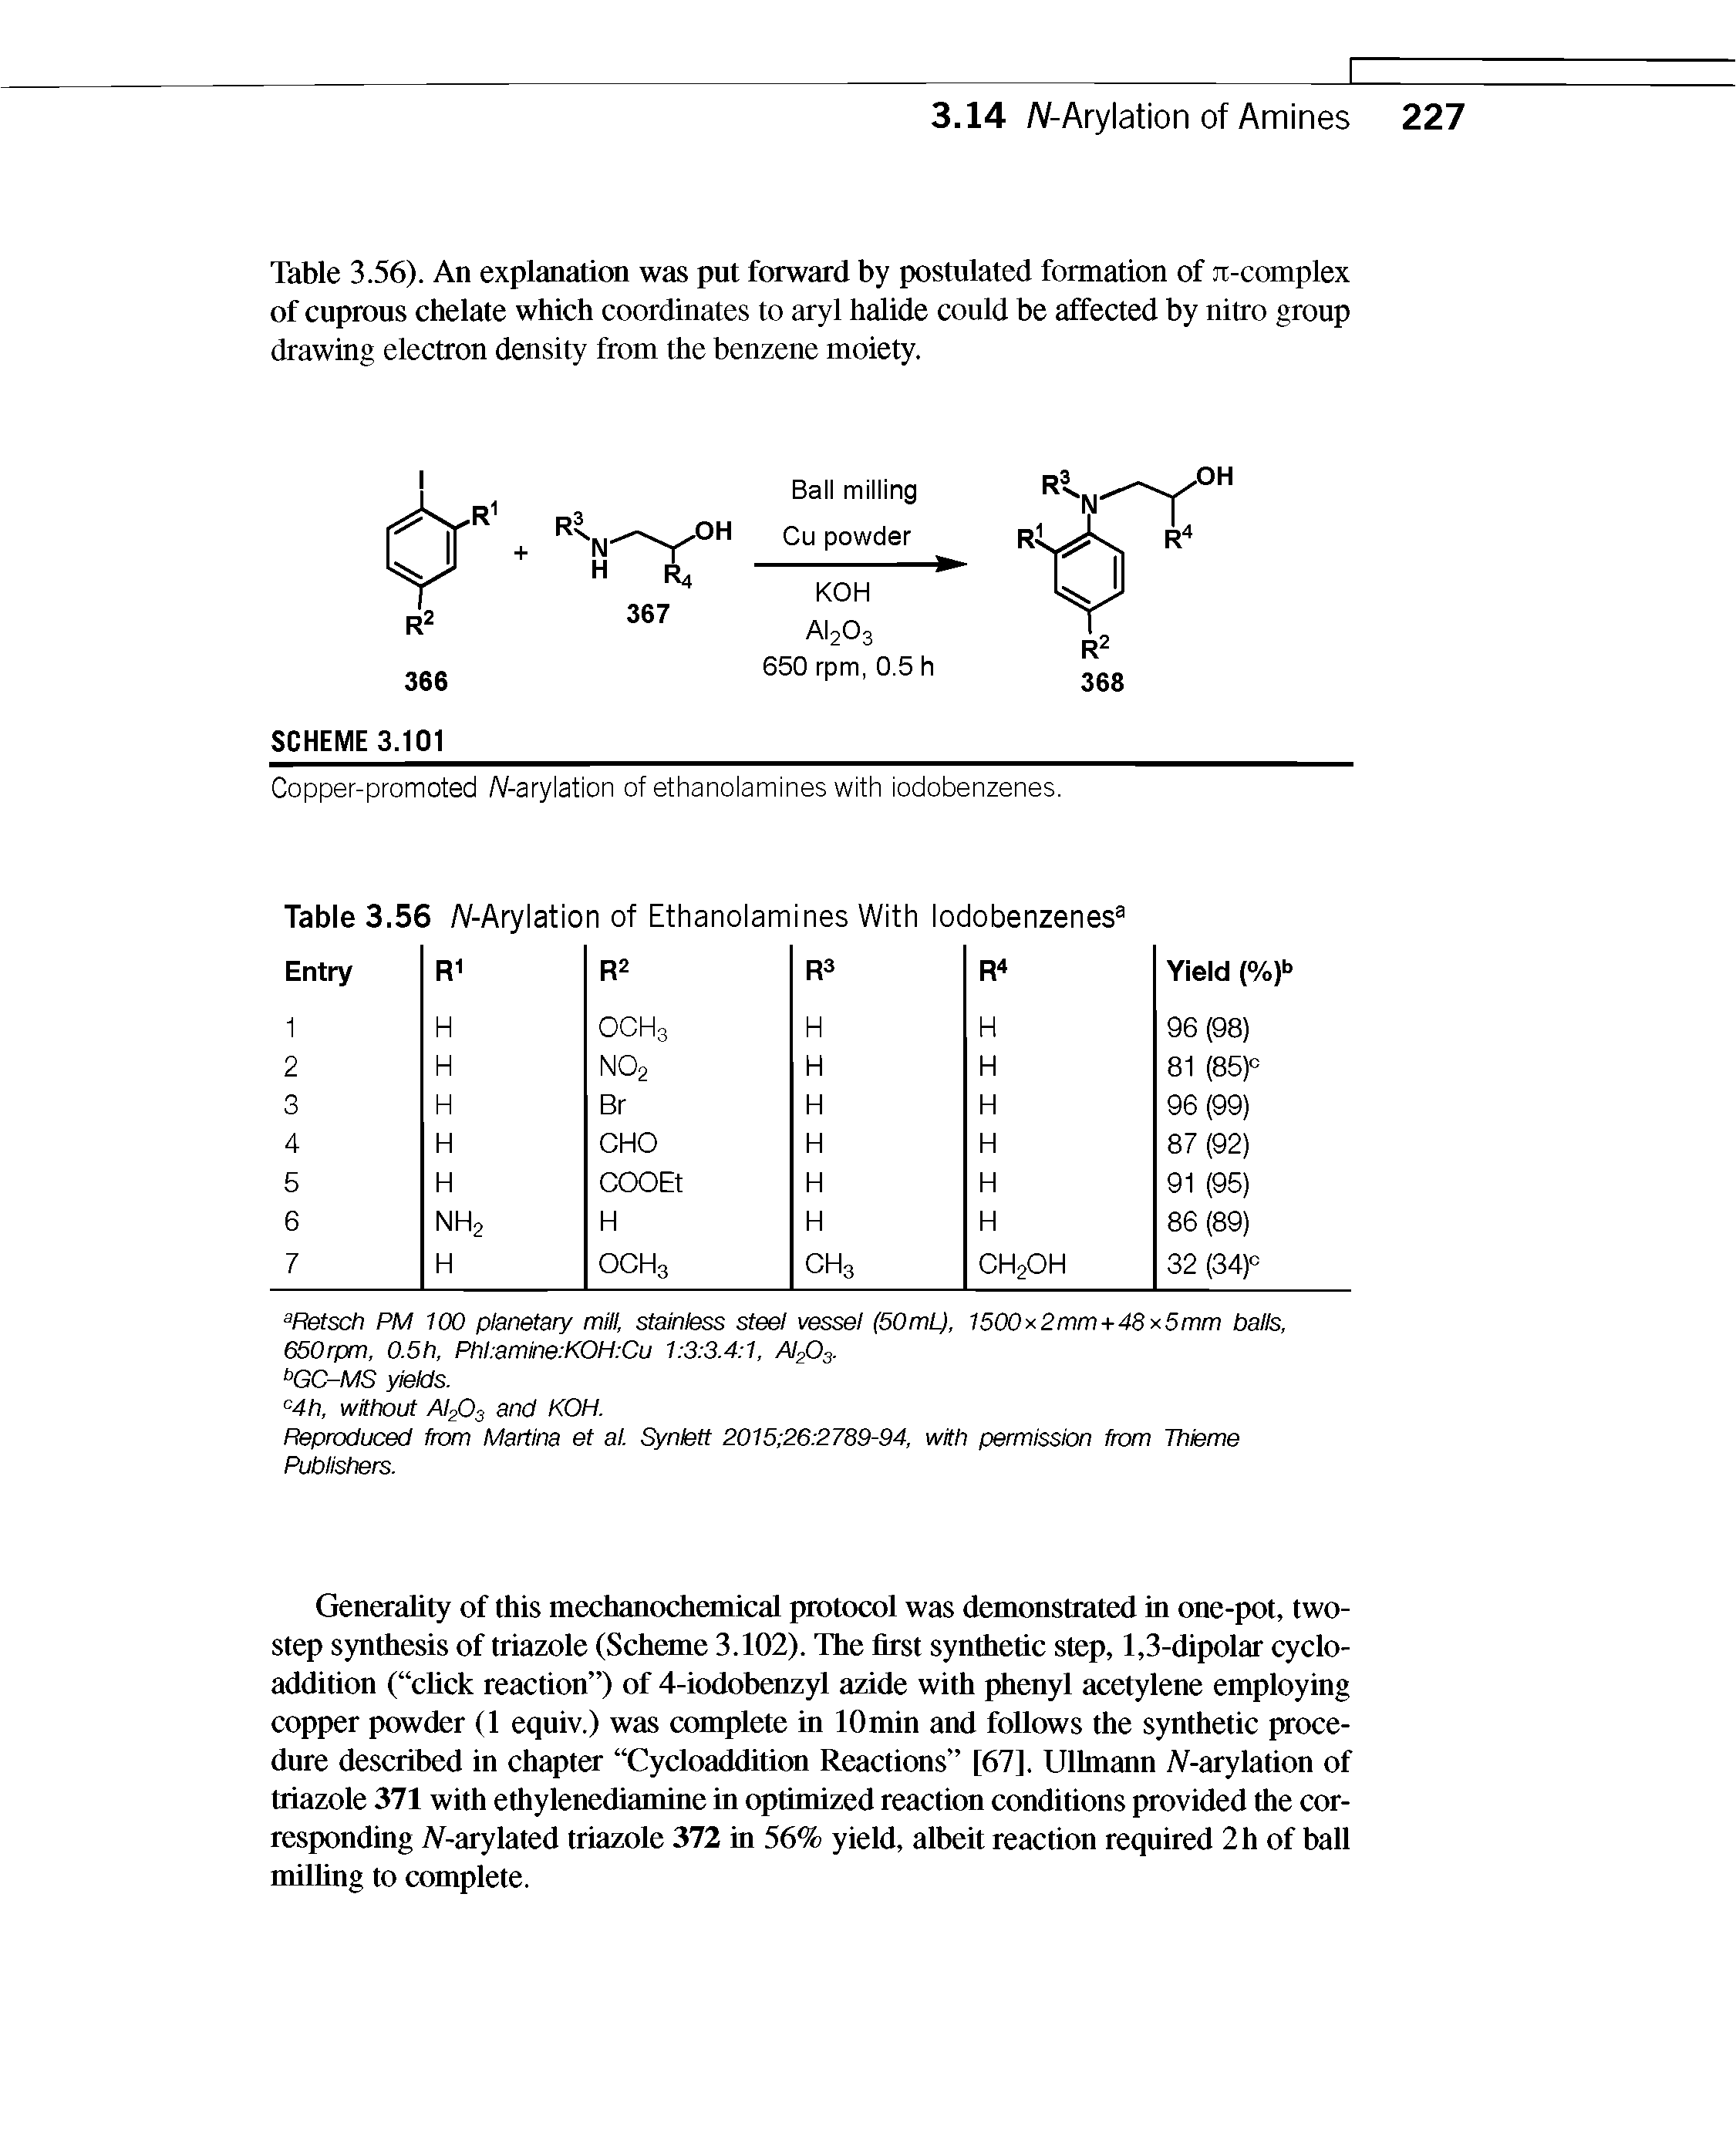 Table 3.56). An explanation was put forward by postulated formation of Ji-complex of cuprous chelate which coordinates to aryl halide could be affected by nitro group drawing electron density from the benzene moiety.